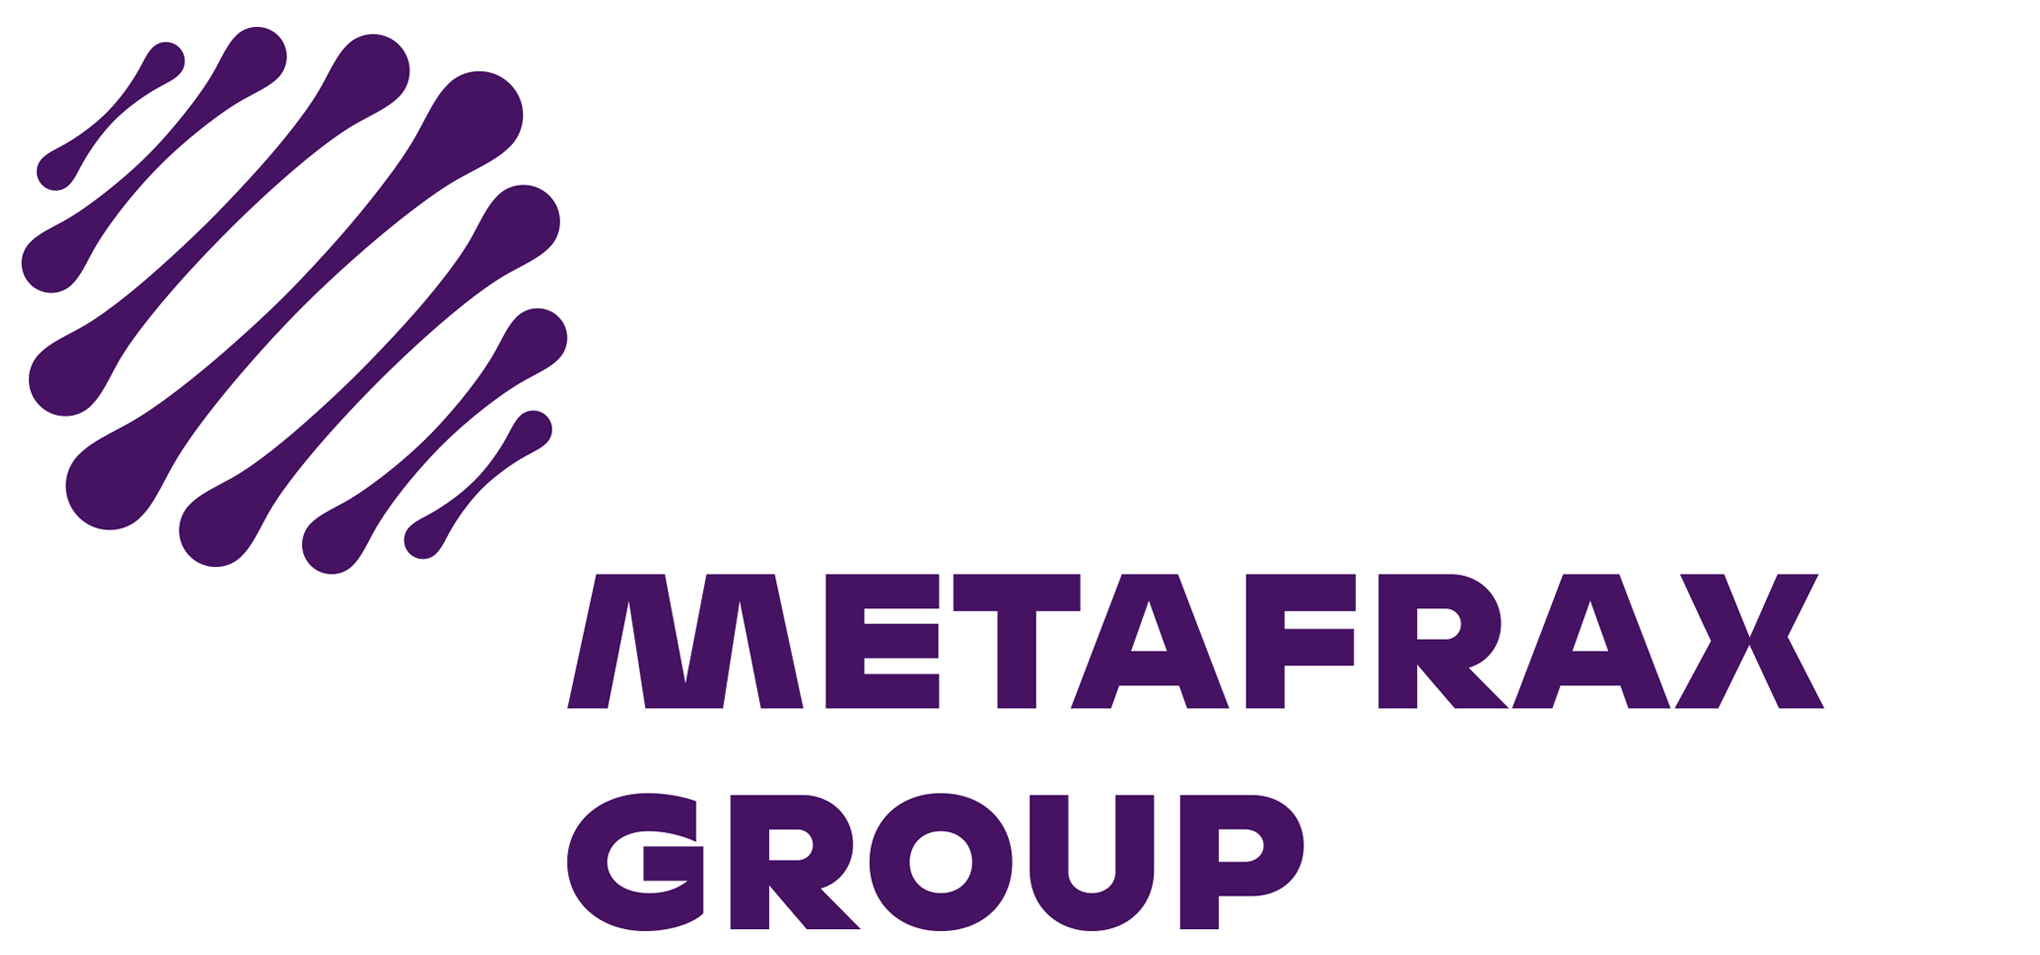 New Logo and Identity for Metafrax by Electric Brand Consultants